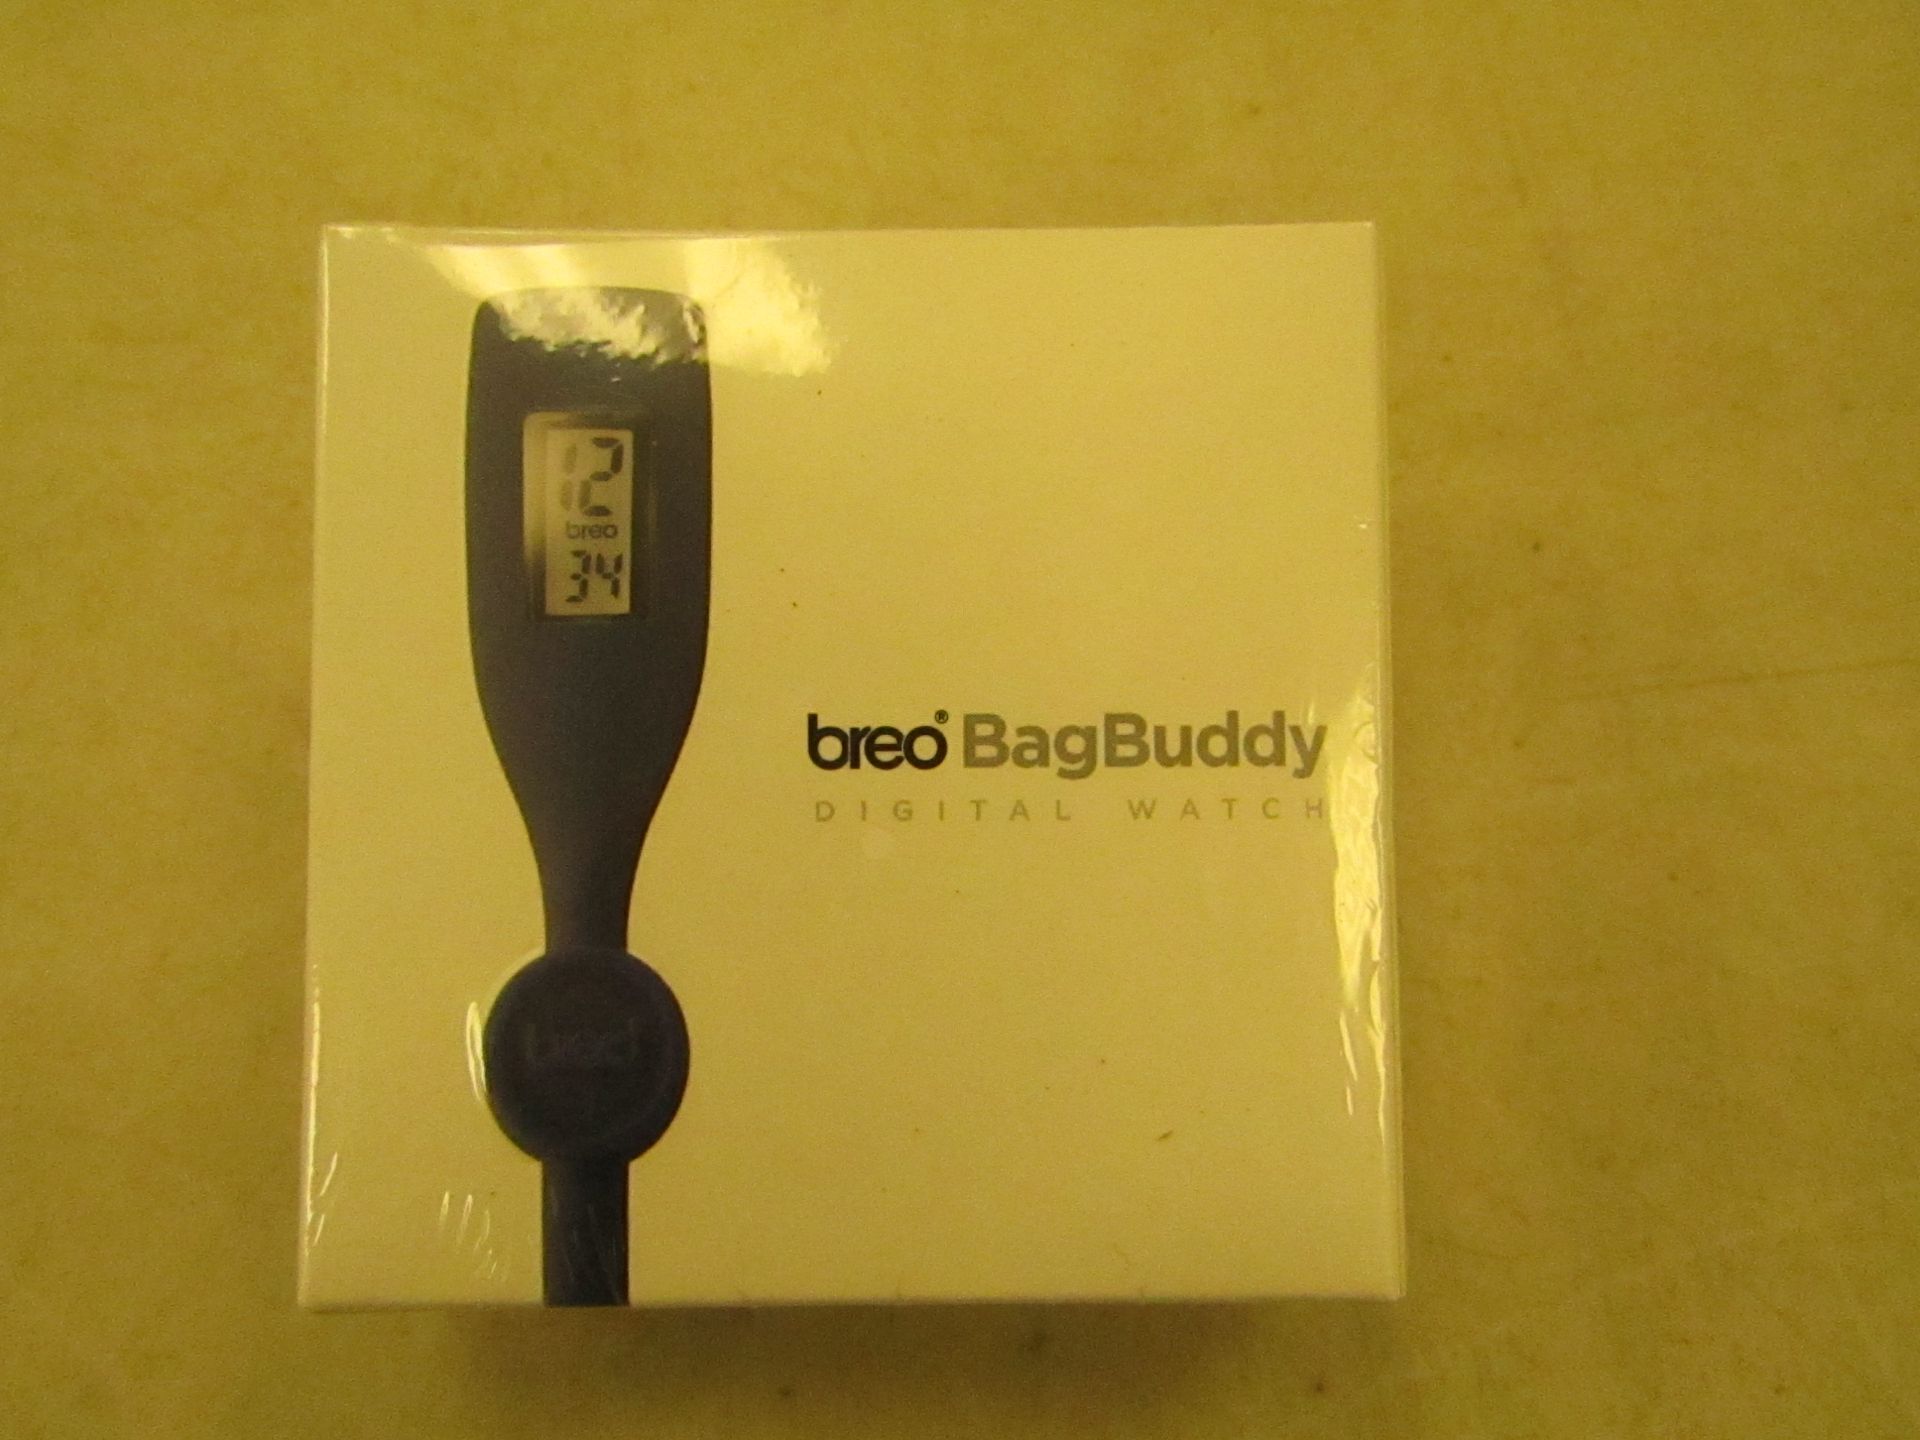 Breo Bag Buddy digital watch, new and boxed.